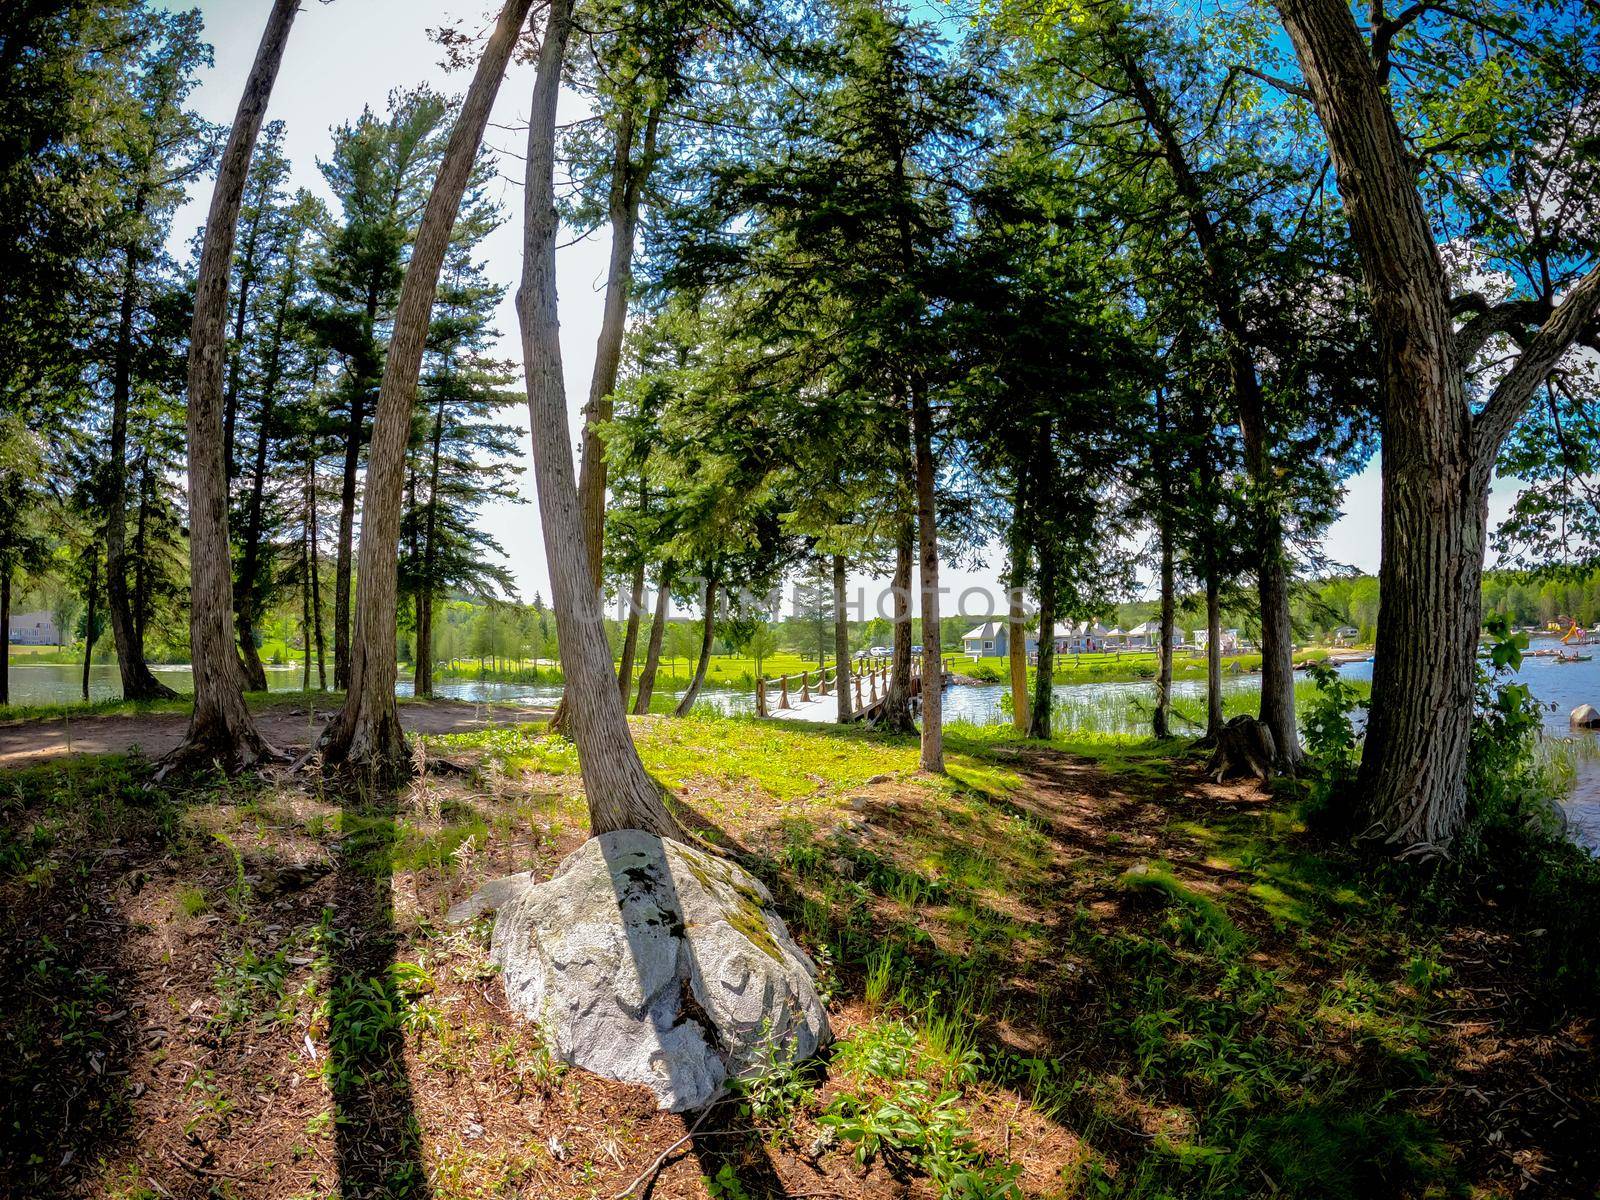 Fisheye shot of trees in the woods, with blue sky. Landscape view, background.